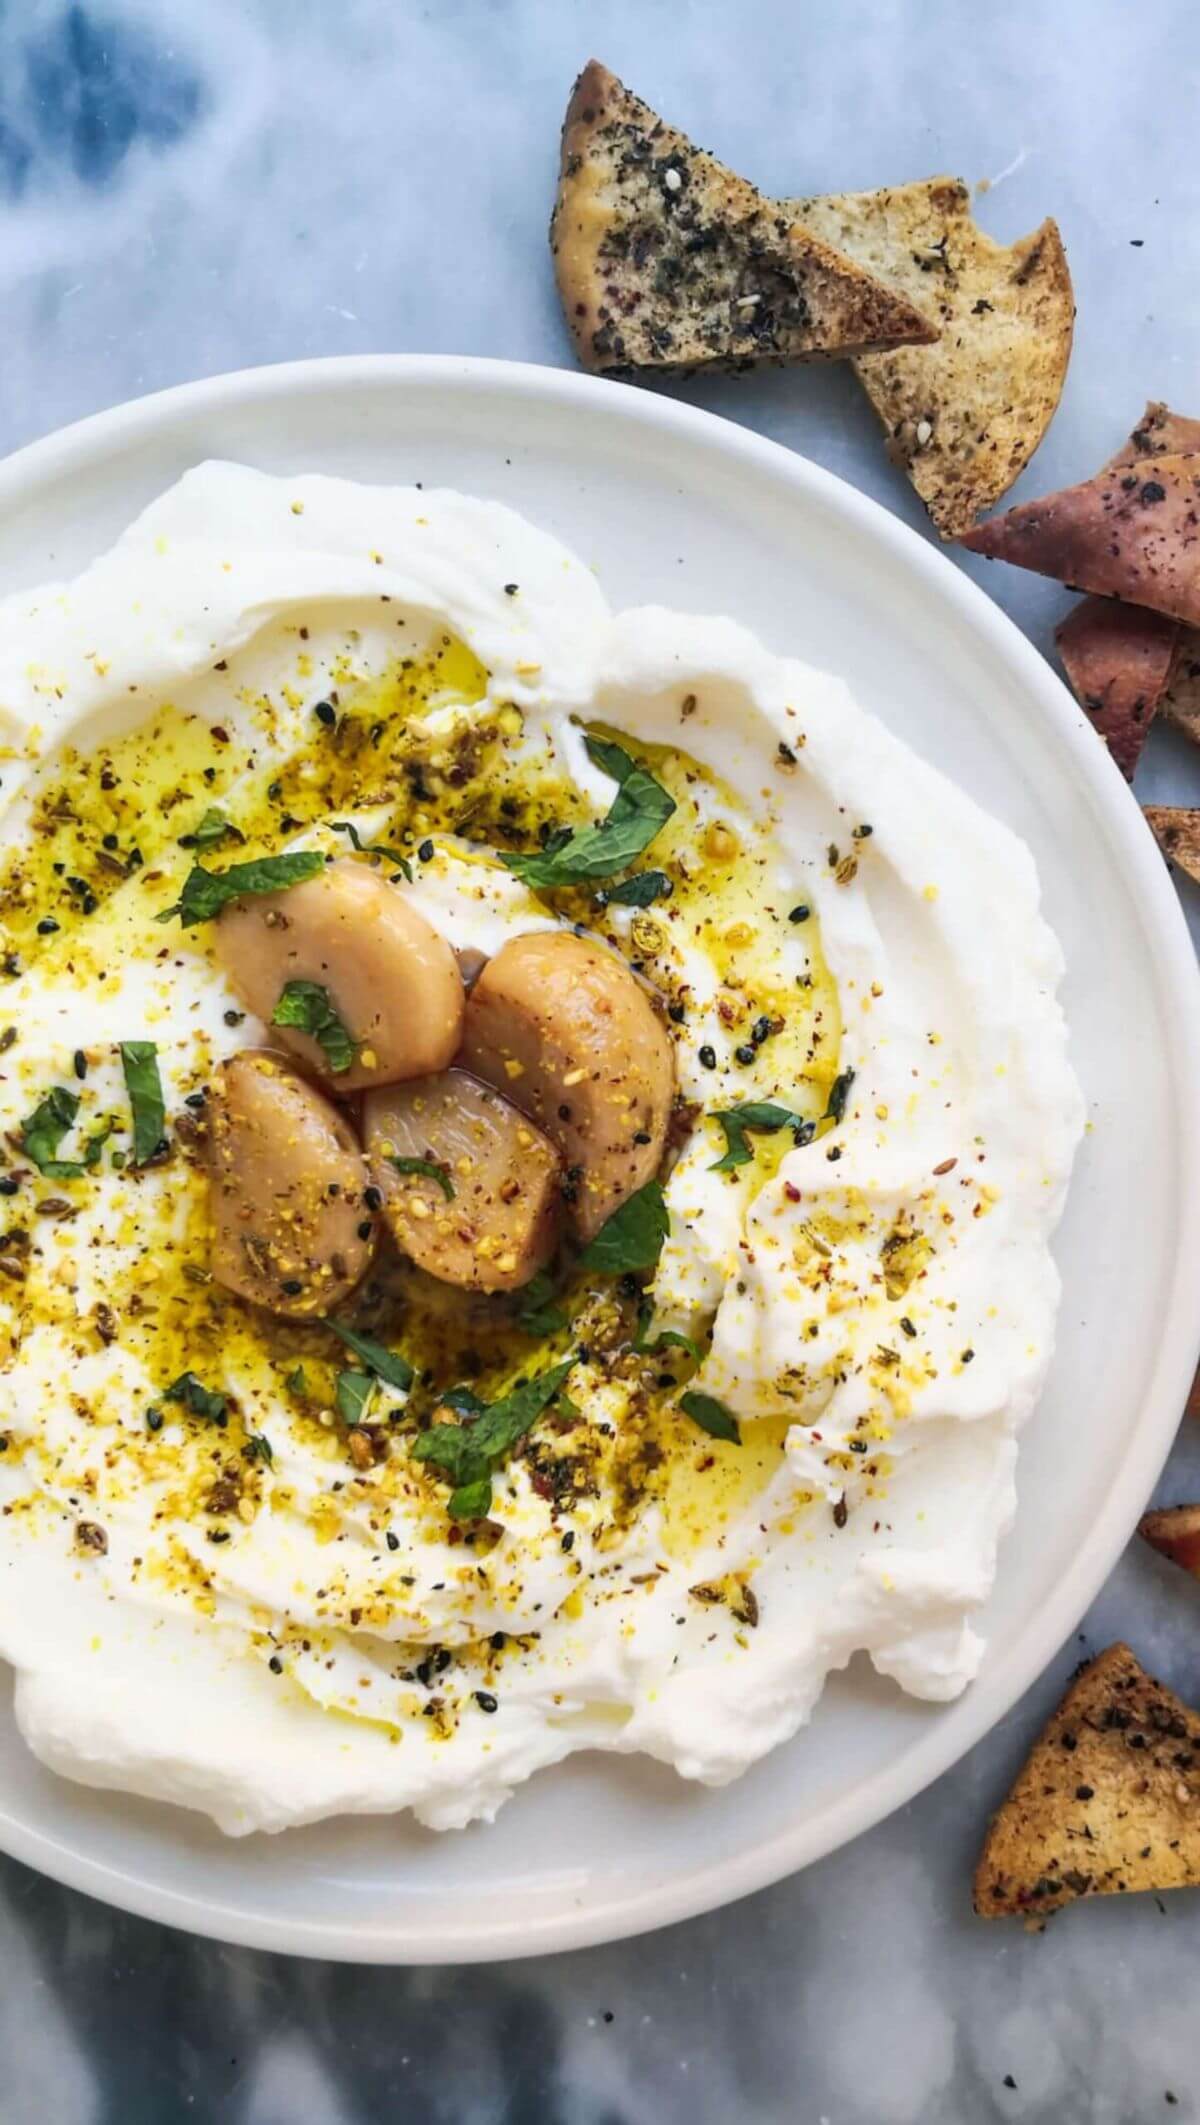 Labneh with confit garlic and dukkah on a plate with pita chips on the side.